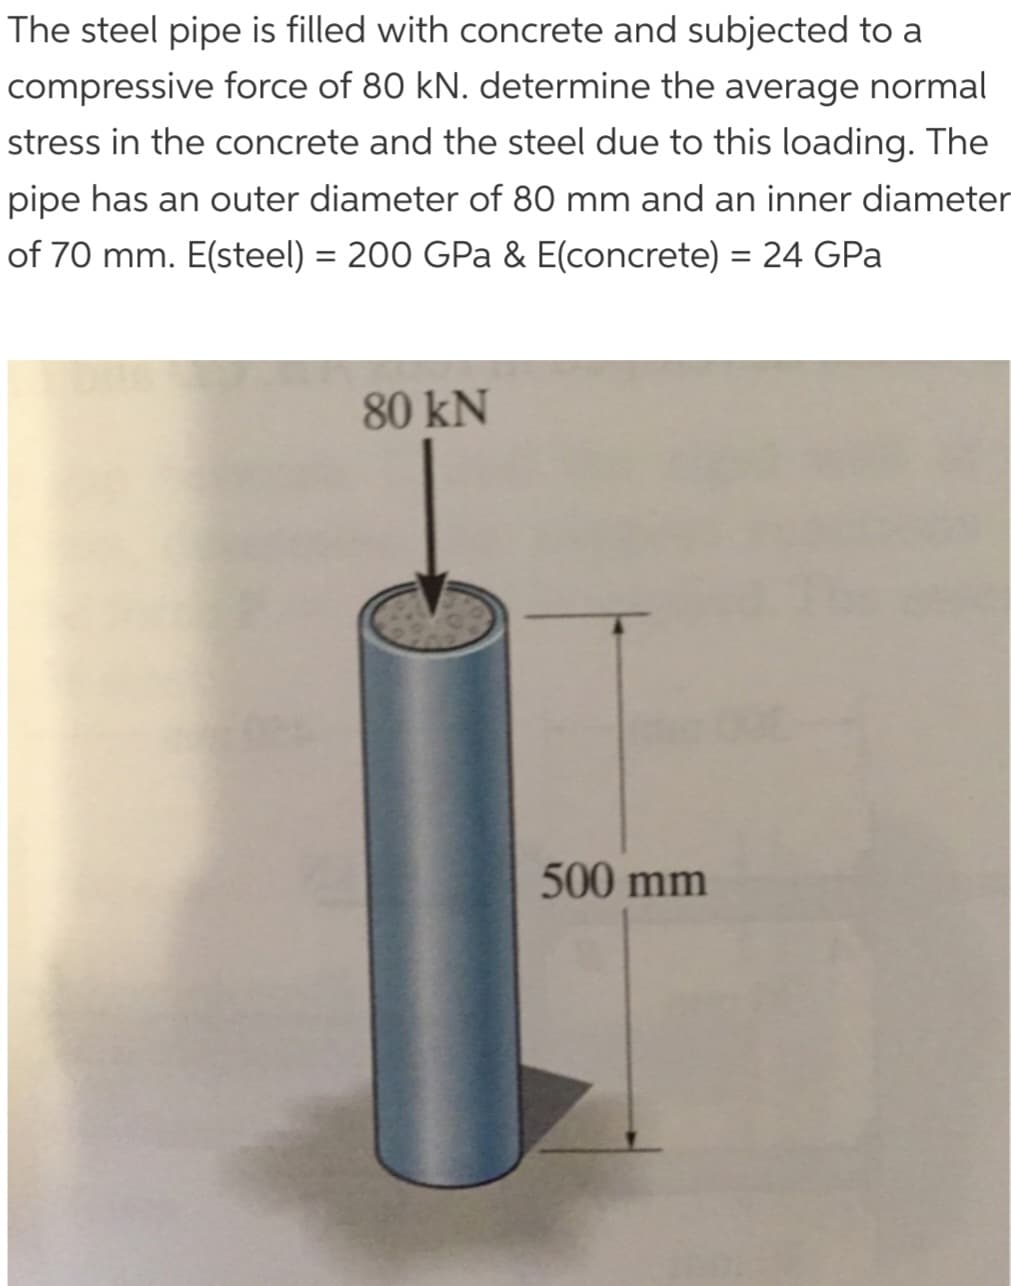 The steel pipe is filled with concrete and subjected to a
compressive force of 80 kN. determine the average normal
stress in the concrete and the steel due to this loading. The
pipe has an outer diameter of 80 mm and an inner diameter
of 70 mm. E(steel) = 200 GPa & E(concrete) = 24 GPa
80 kN
500 mm